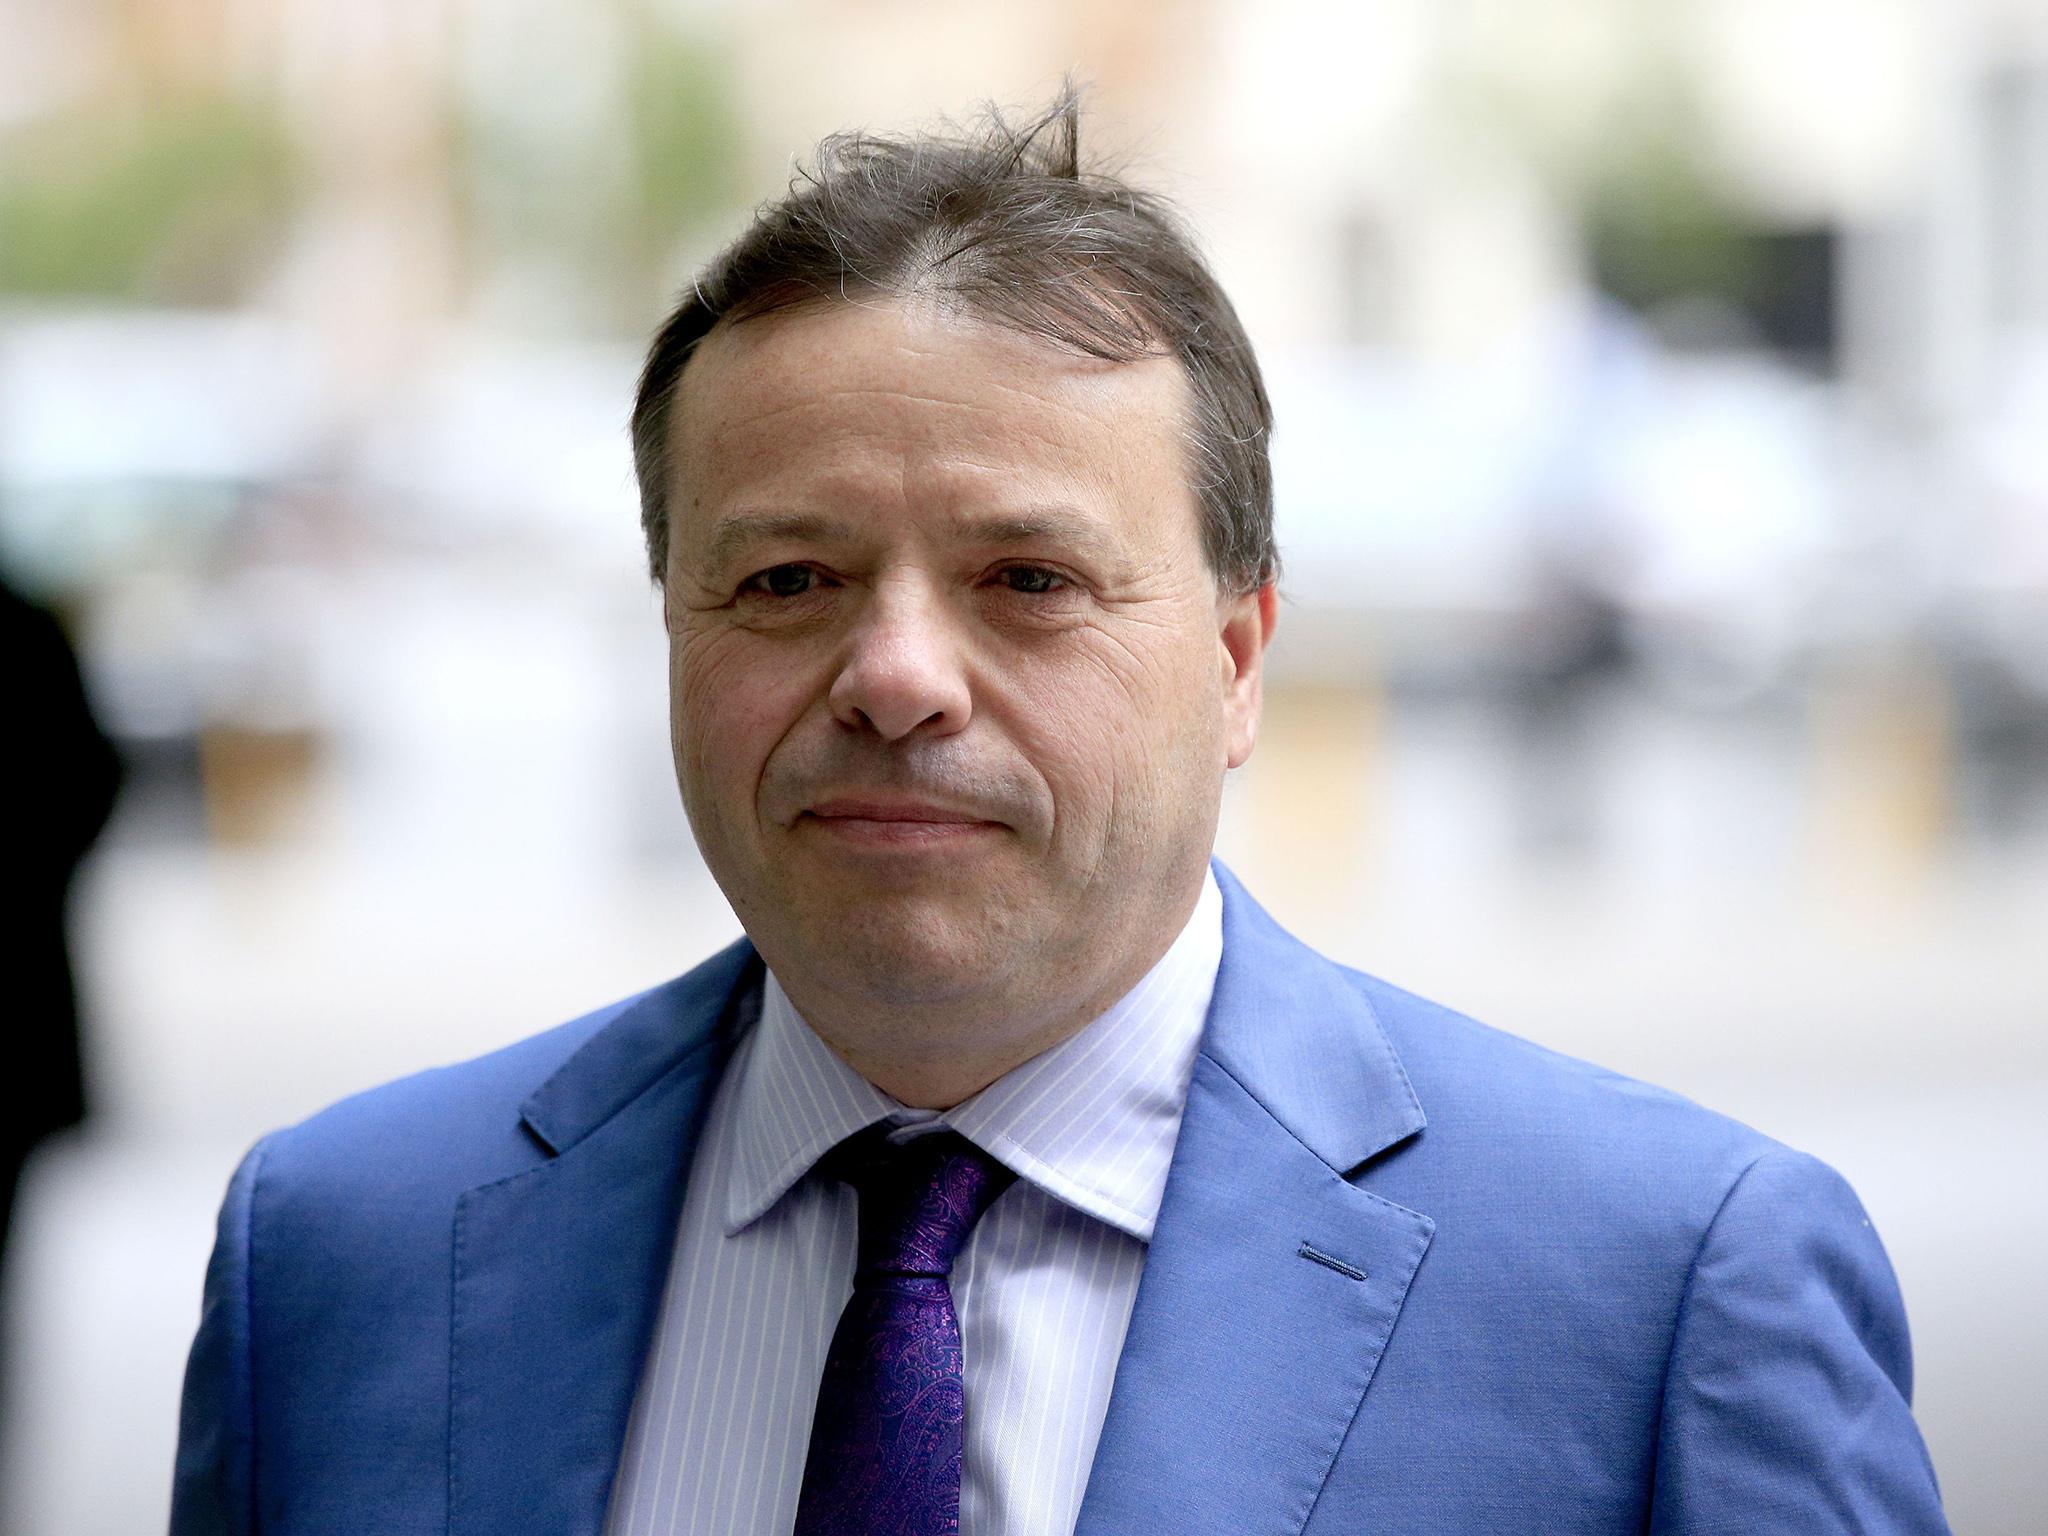 &#13;
Arron Banks said a second referendum was "the only option" &#13;